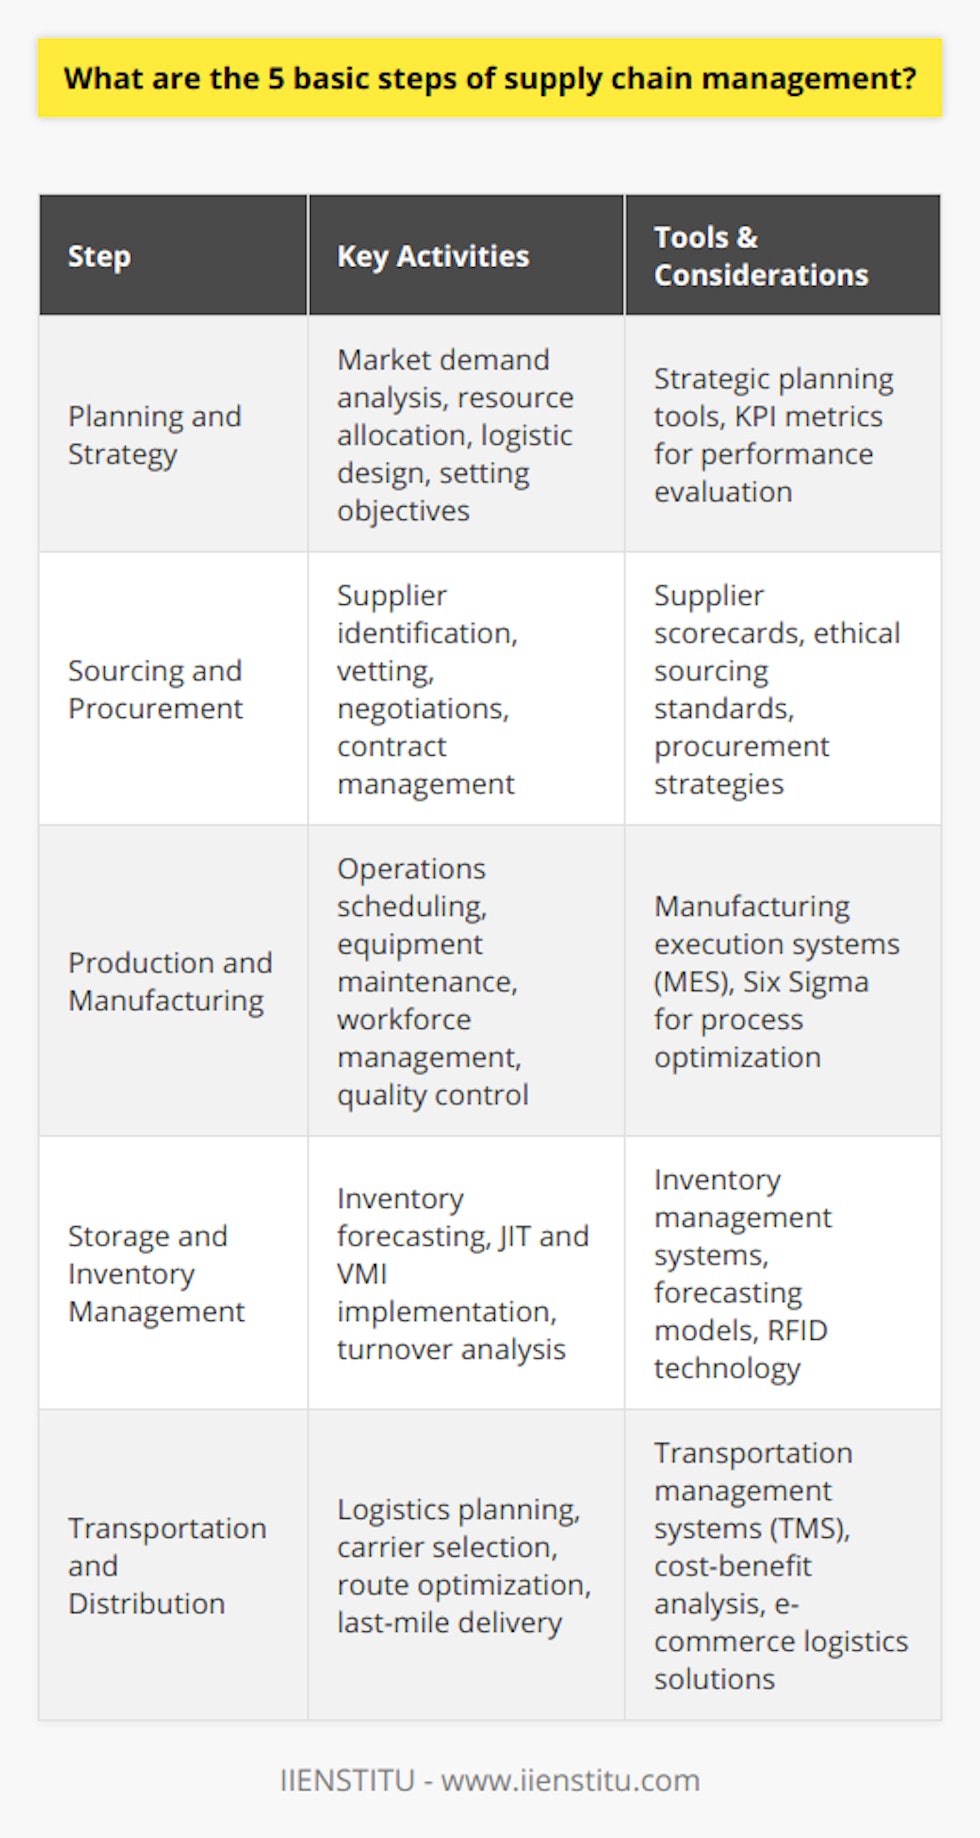 Supply chain management is a critical facet of business operations, involving the careful orchestration of materials, information, and finances as they flow from suppliers to manufacturers to consumers. This complex process is simplified into five basic steps that provide a framework for operational efficiency and customer satisfaction.**The first step: Planning and Strategy**Effective supply chain management starts with strategic planning. Organizations analyze their market demands, resource availability, and logistical requirements to establish clear objectives. It's not merely about identifying what needs to be done but also how to execute the processes in the most efficient manner possible. Establishing key performance indicators (KPIs) is integral to measuring success and adapting strategies accordingly.**The second step: Sourcing and Procurement**With a strategy in place, the next step is to procure the necessary raw materials and services to create products. Sourcing goes beyond finding suppliers; it involves vetting for reliability, ethical practices, quality, and financial viability. Strategic buying decisions can enhance profitability and reduce risks. Thus, procurement is not a mere transaction but a series of negotiations and long-term relationship building with key suppliers.**The third step: Production and Manufacturing**Production is more than just manufacturing; it encompasses the scheduling of operations, the maintenance of equipment, the training and productivity of the workforce, and the quality control of the products manufactured. It also involves constant monitoring and optimizing to ensure that production lines run smoothly and product output meets both quality standards and customer demand.**The fourth step: Storage and Inventory Management**Effective inventory management balances the fine line between having enough stock to meet demand and avoiding excess that leads to high holding costs or obsolescence. Through state-of-the-art inventory systems and processes like Just-In-Time (JIT) or Vendor Managed Inventory (VMI), businesses can avoid shortages and reduce costs. Accurate forecasting and inventory turnover analysis are key to this step.**The fifth step: Transportation and Distribution**The last leg of supply chain management is the delivery of products. The choice of transportation can affect the speed of delivery, cost, and product condition upon arrival. Therefore, logistics managers look for the most efficient, cost-effective option that aligns with customer expectations and company capability, whether it involves trucks, trains, airplanes, or ships. Additionally, the growth of e-commerce has compelled businesses to innovate in last-mile delivery logistics to keep up with customer demands.To navigate these steps, companies often turn to education and consultancy services provided by institutions such as IIENSTITU, which specializes in professional development in various sectors including supply chain management. Through this specialized support, organizations can enhance the skills necessary to effectively manage the complexities of supply chains.Maintaining a seamless supply chain is challenging but mastering the basic steps—planning, sourcing, production, inventory management, and distribution—is essential for staying competitive in today's global marketplace. With detailed attention to each step, a business can deliver on its promises to the customer and build a reputation for reliability and excellence.